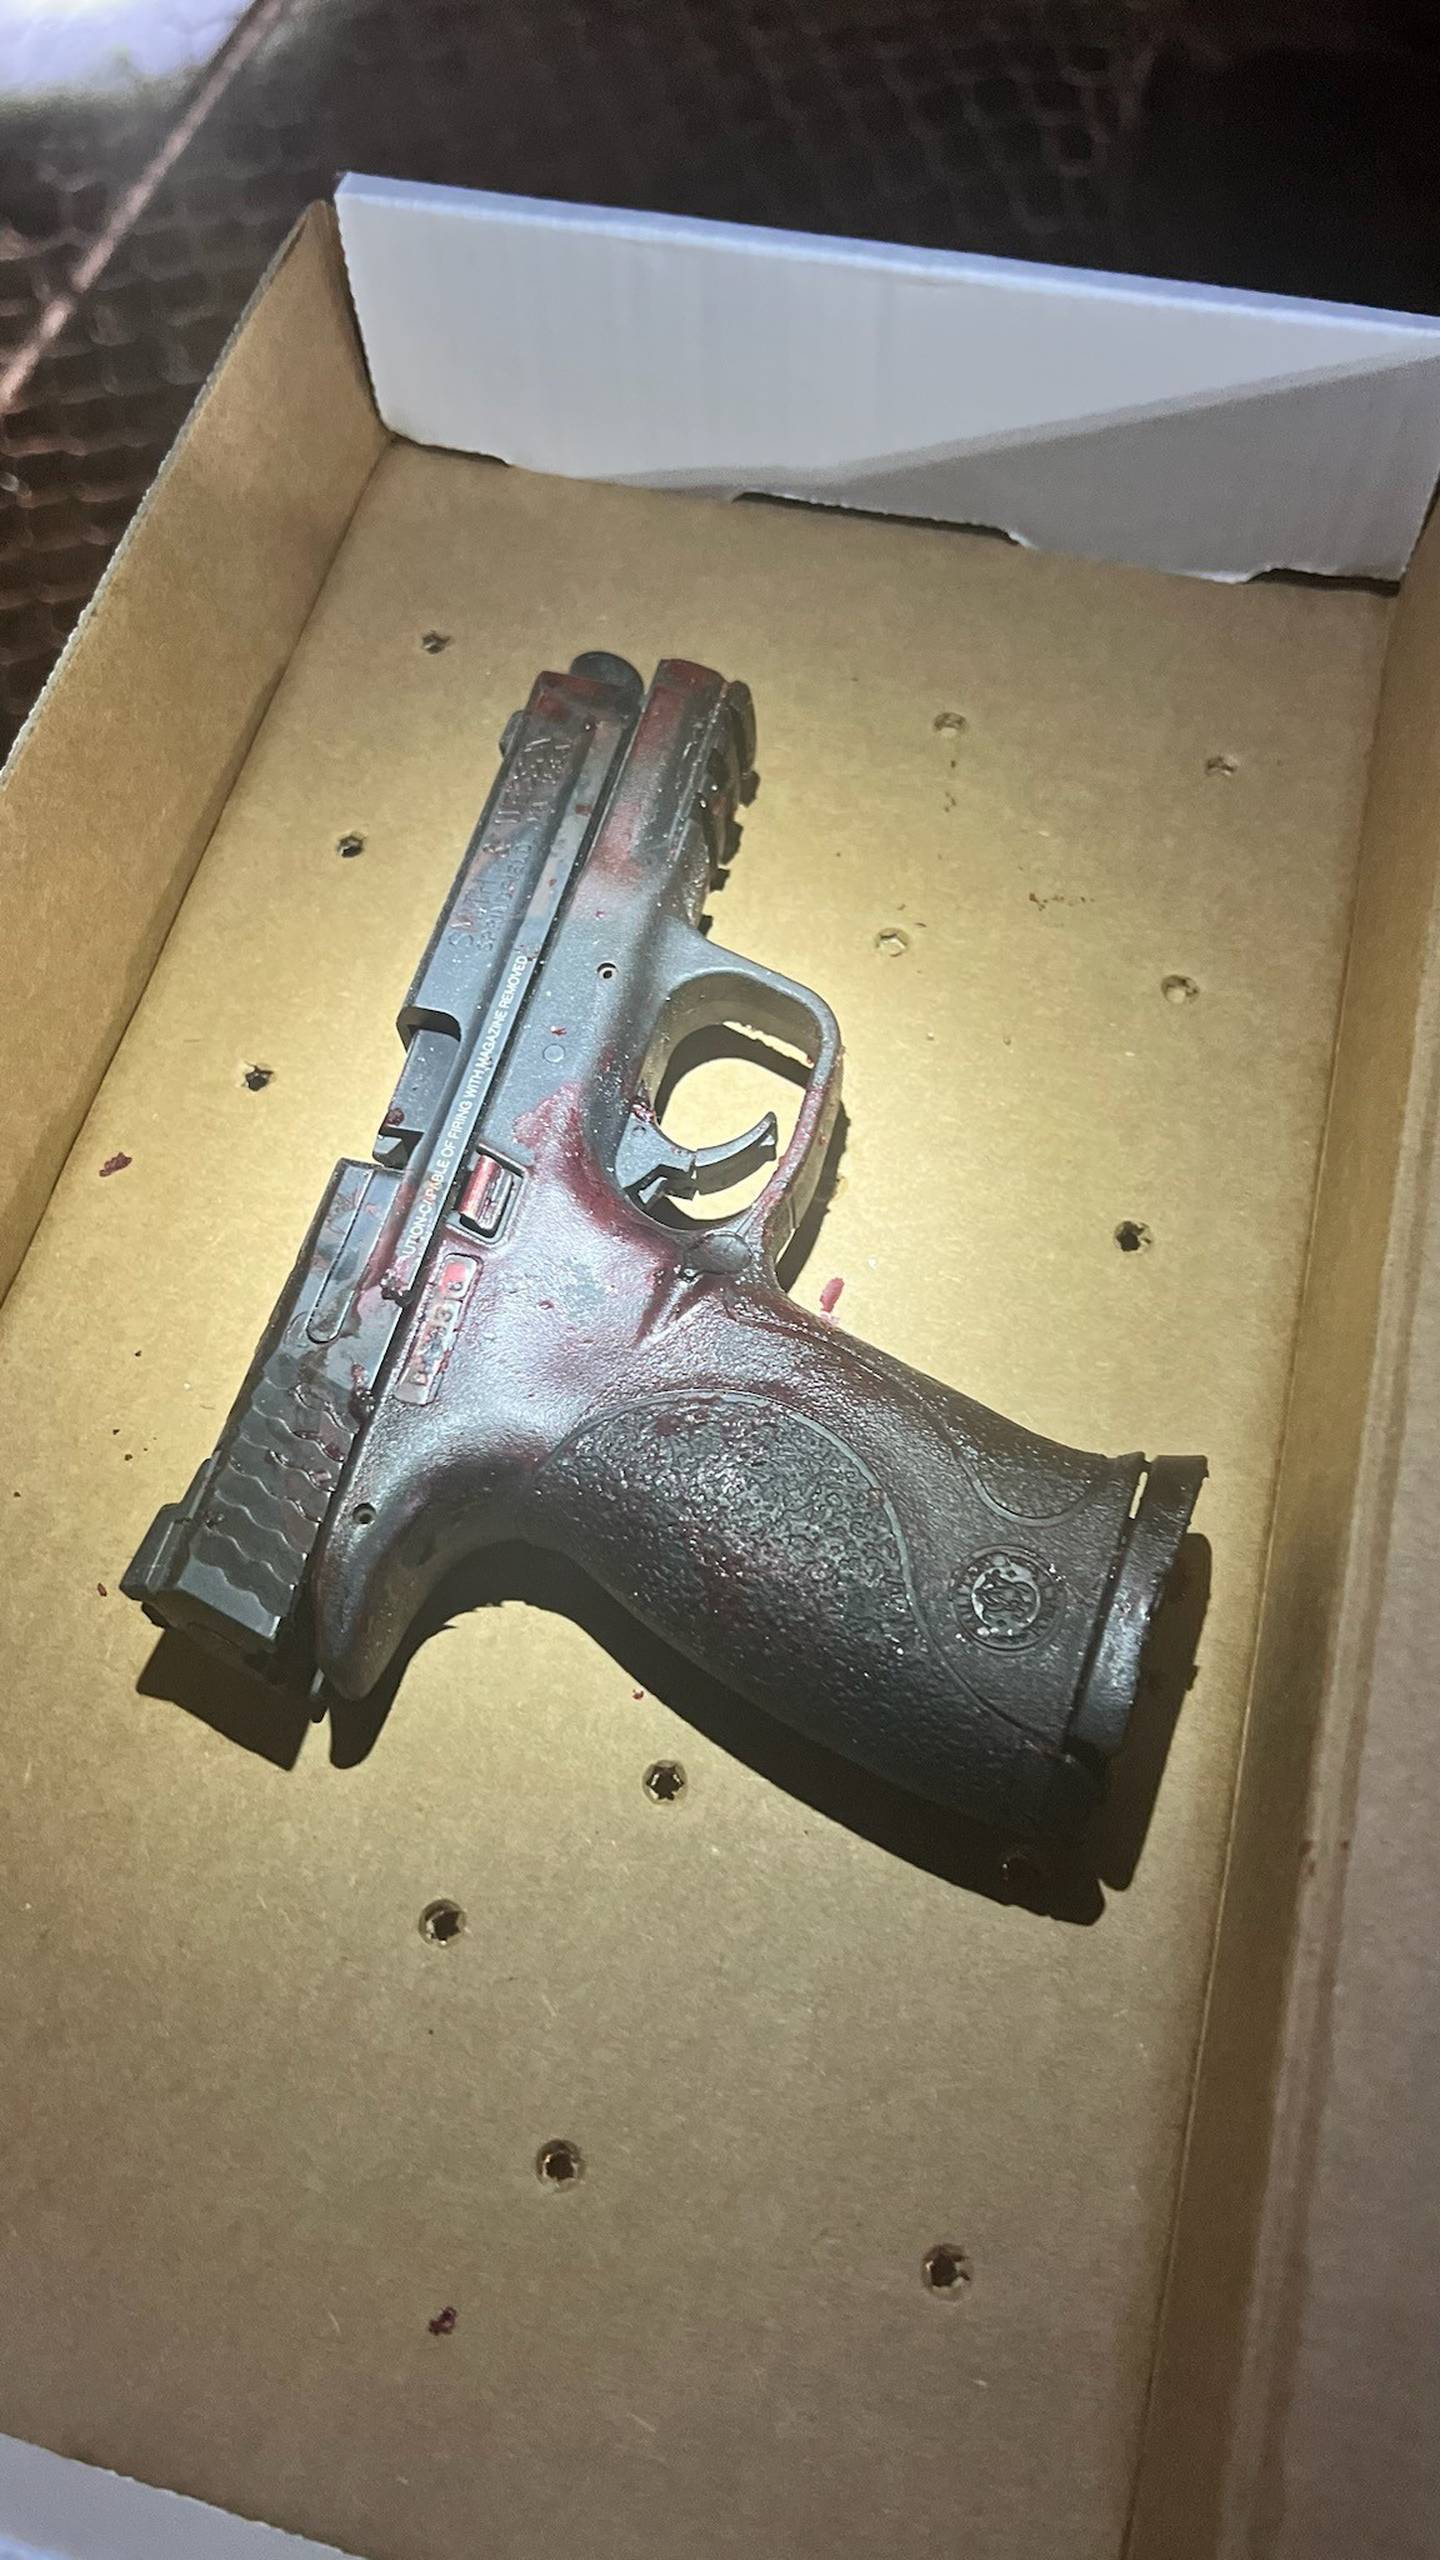 Firearm used by suspect in Jacksonville officer-involved shooting